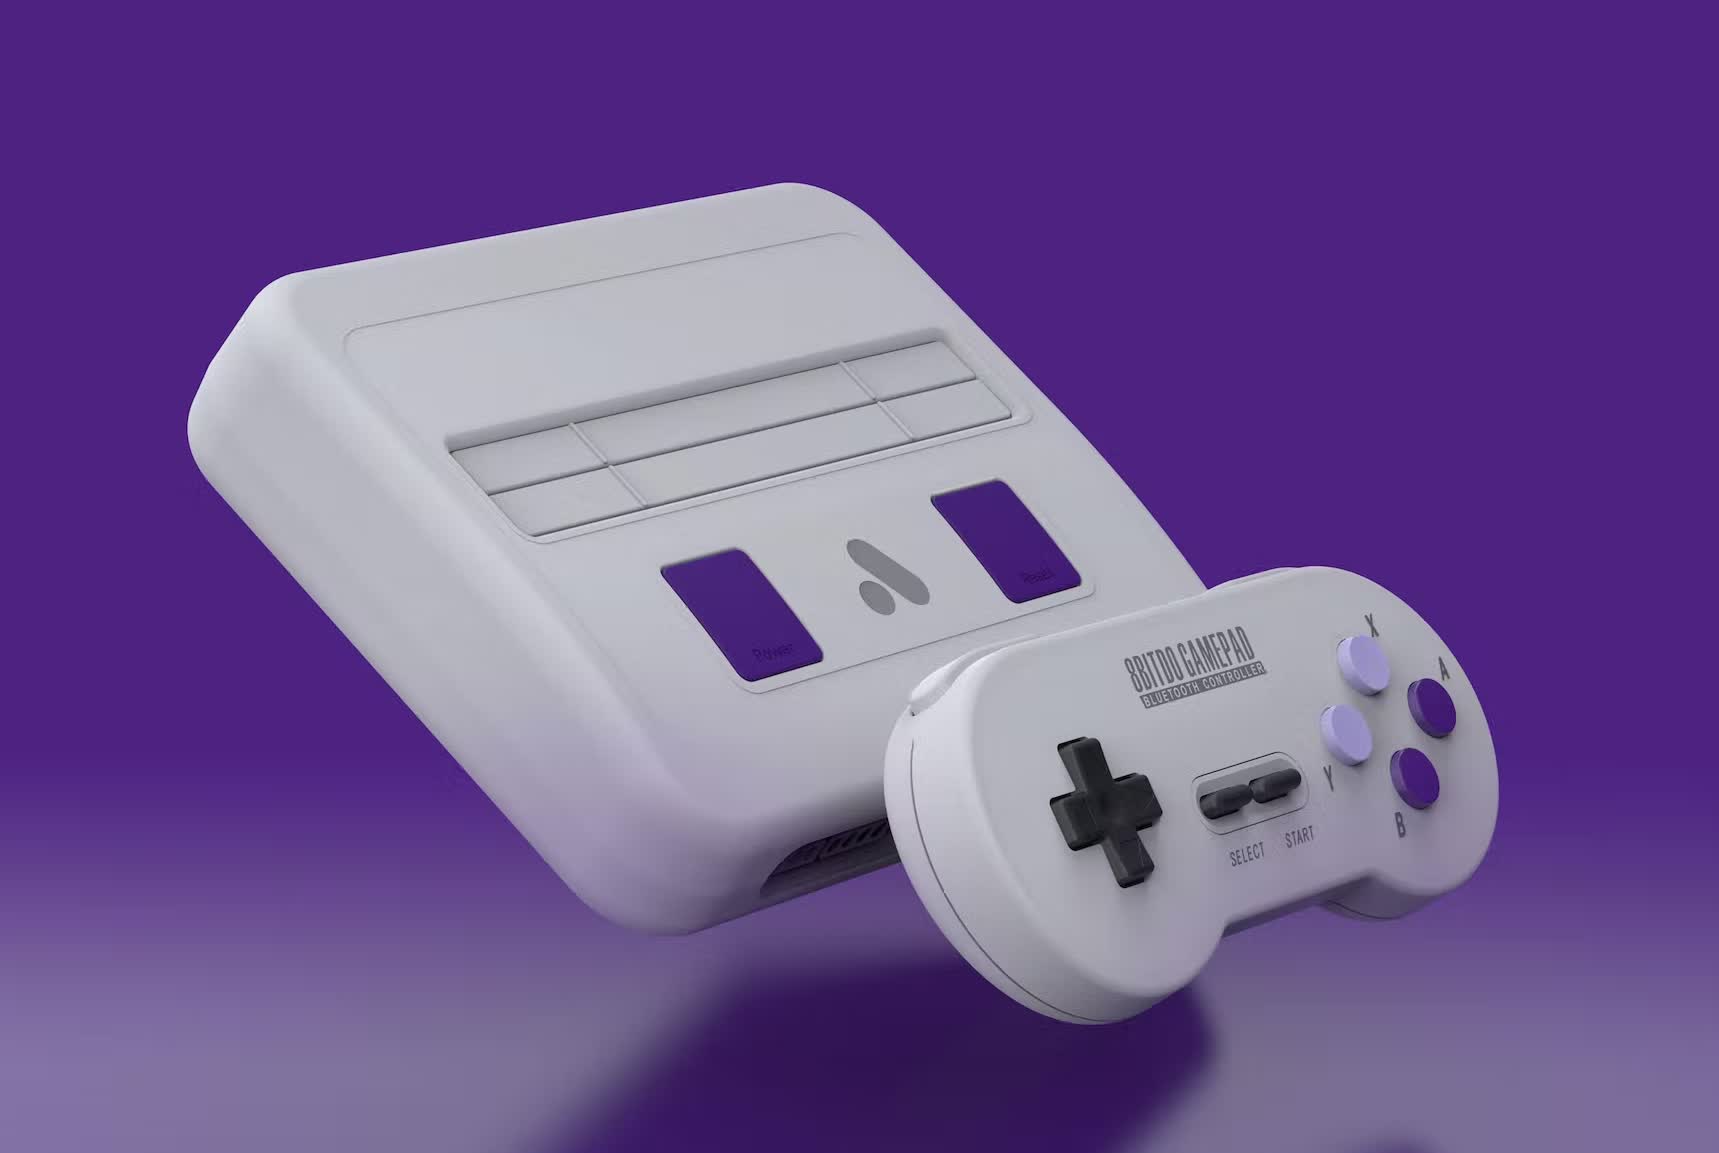 Analogue is doing one last production run of its SNES and Genesis clones